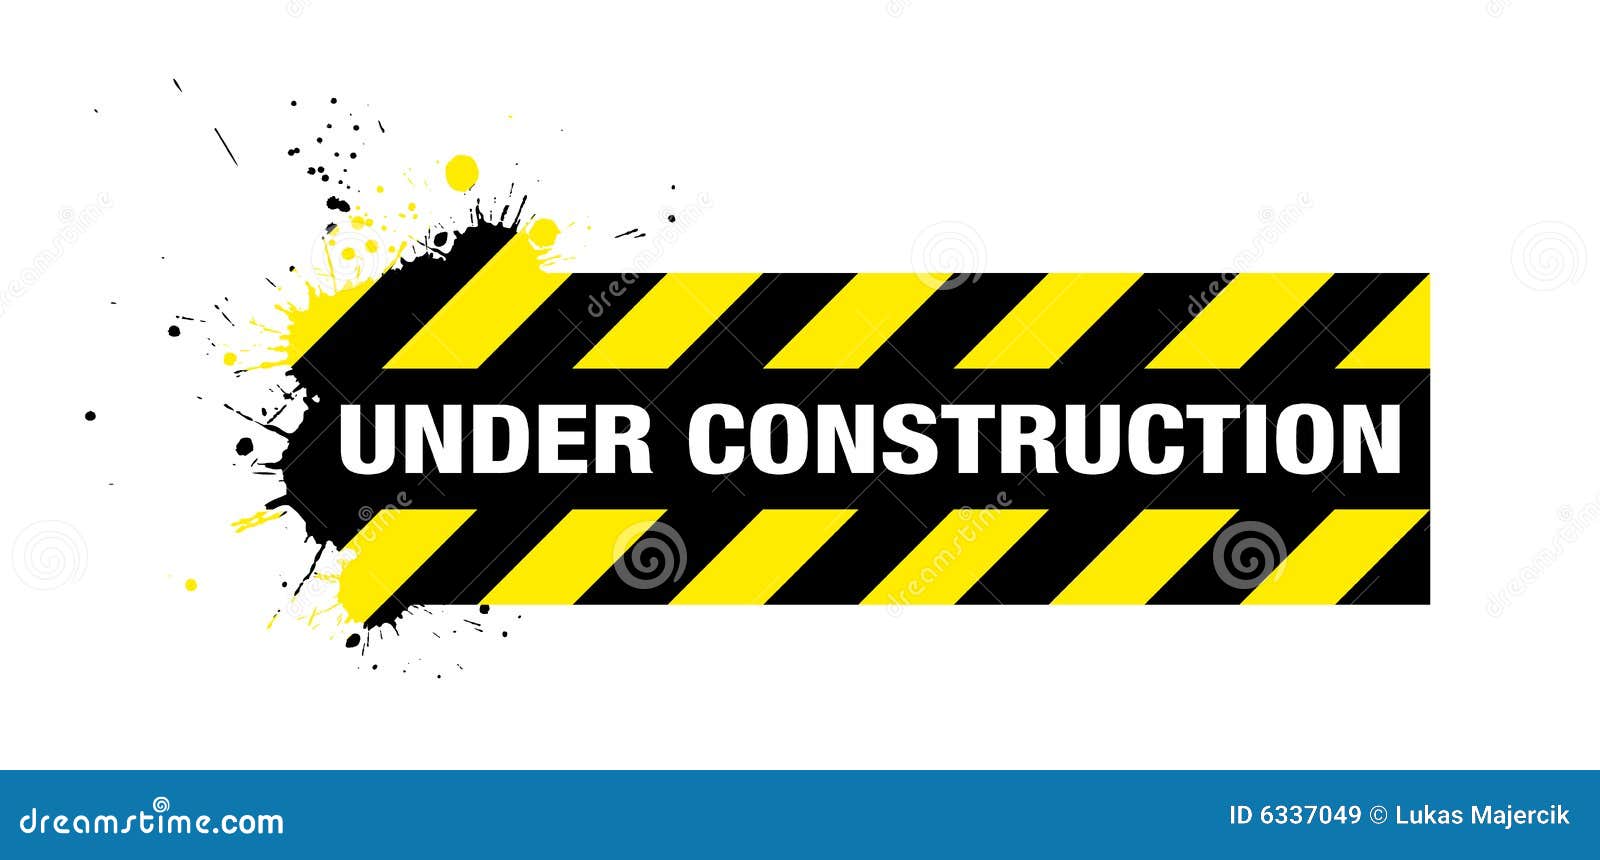 Under construction sign stock vector. Illustration of real - 6337049